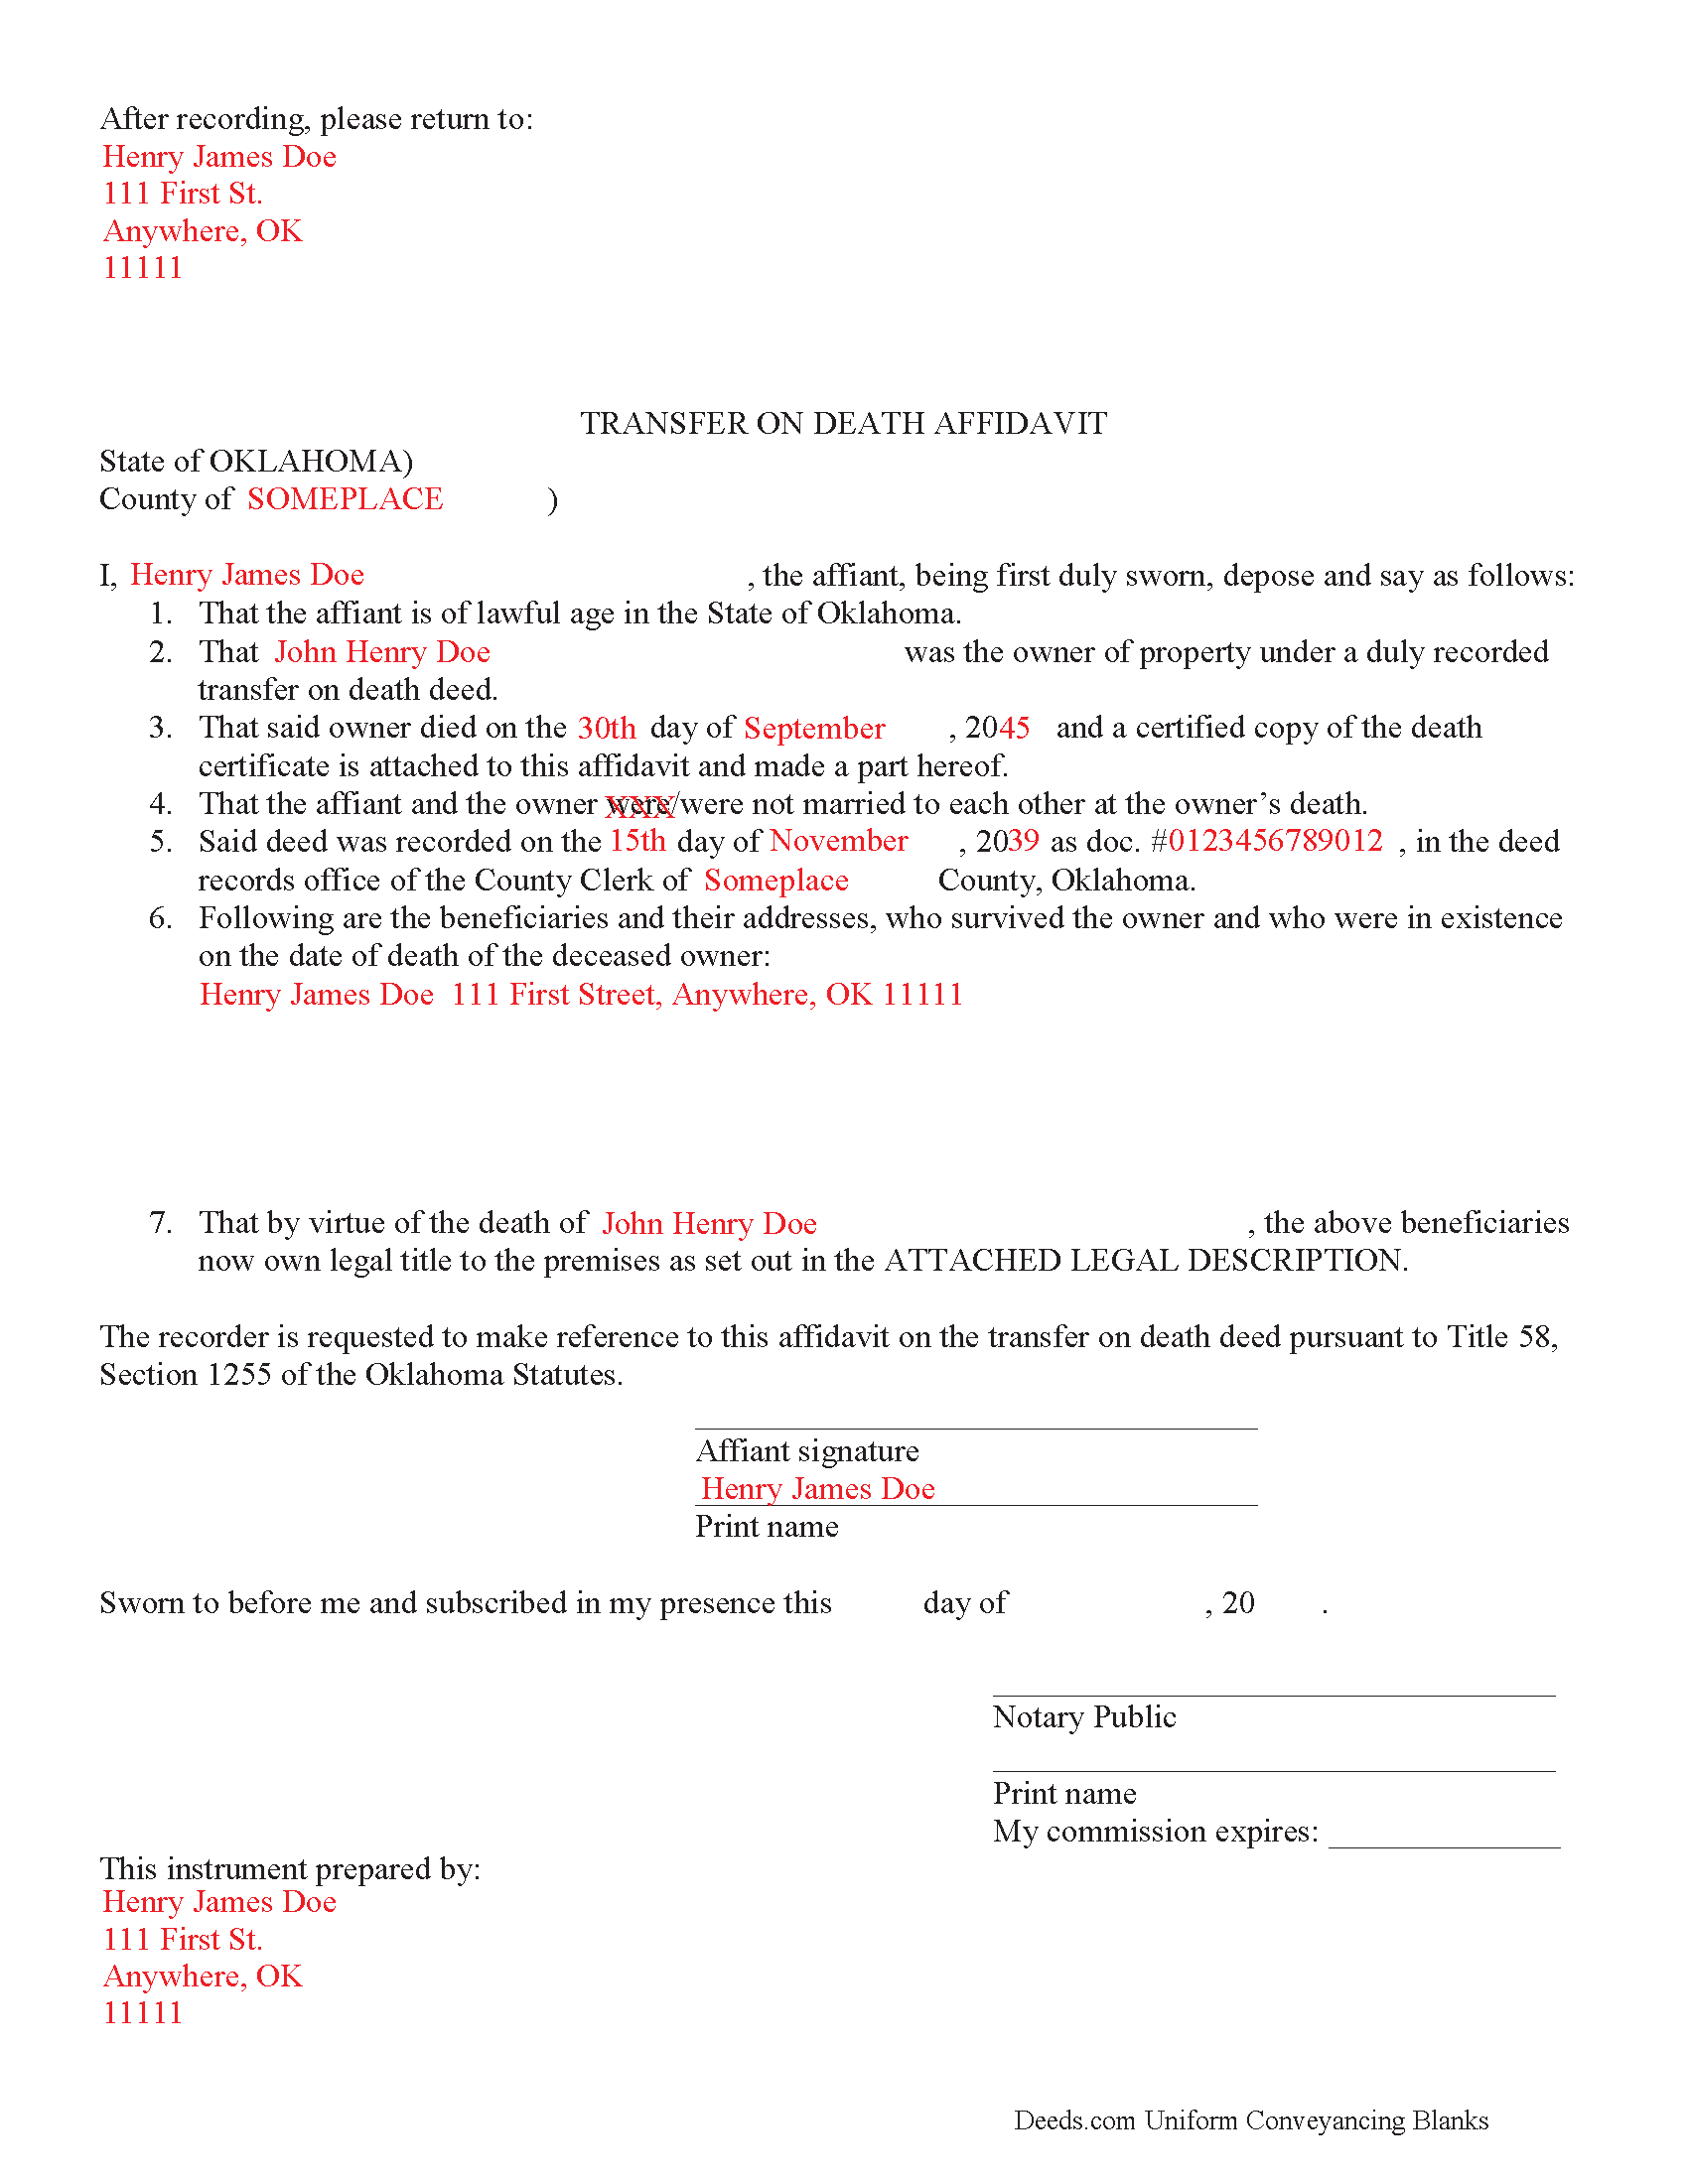 Completed Example of the Transfer on Death Affidavit of Acceptance Document